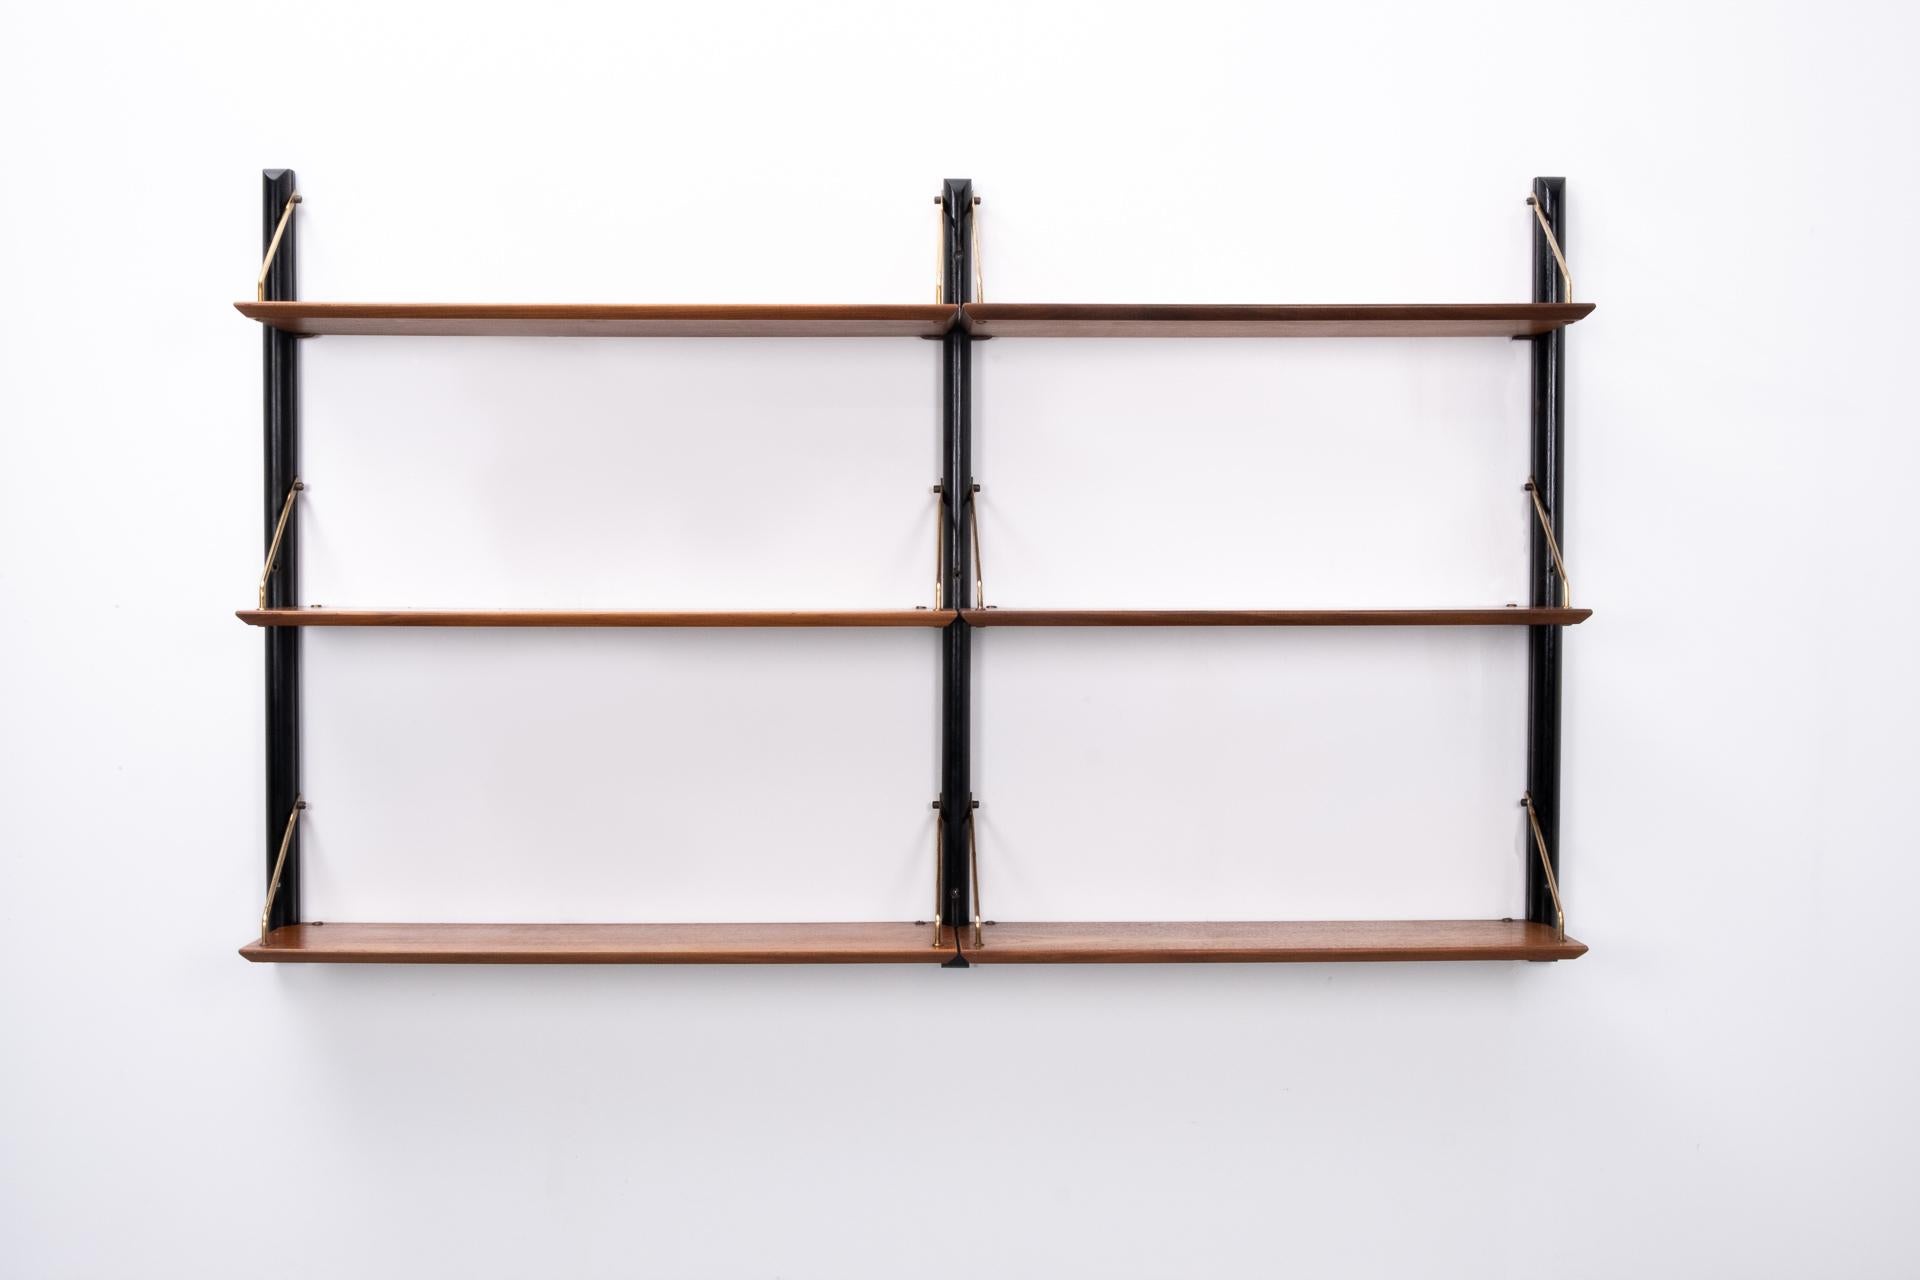 Beautiful wall unit. Three black ebonized uprights, holding 6 teak shelves. Solid brass brackets.
Superb quality and condition. With just the right amount off patina. Nice warm color on the teak shelves.
Comes with the original brass screws.
 